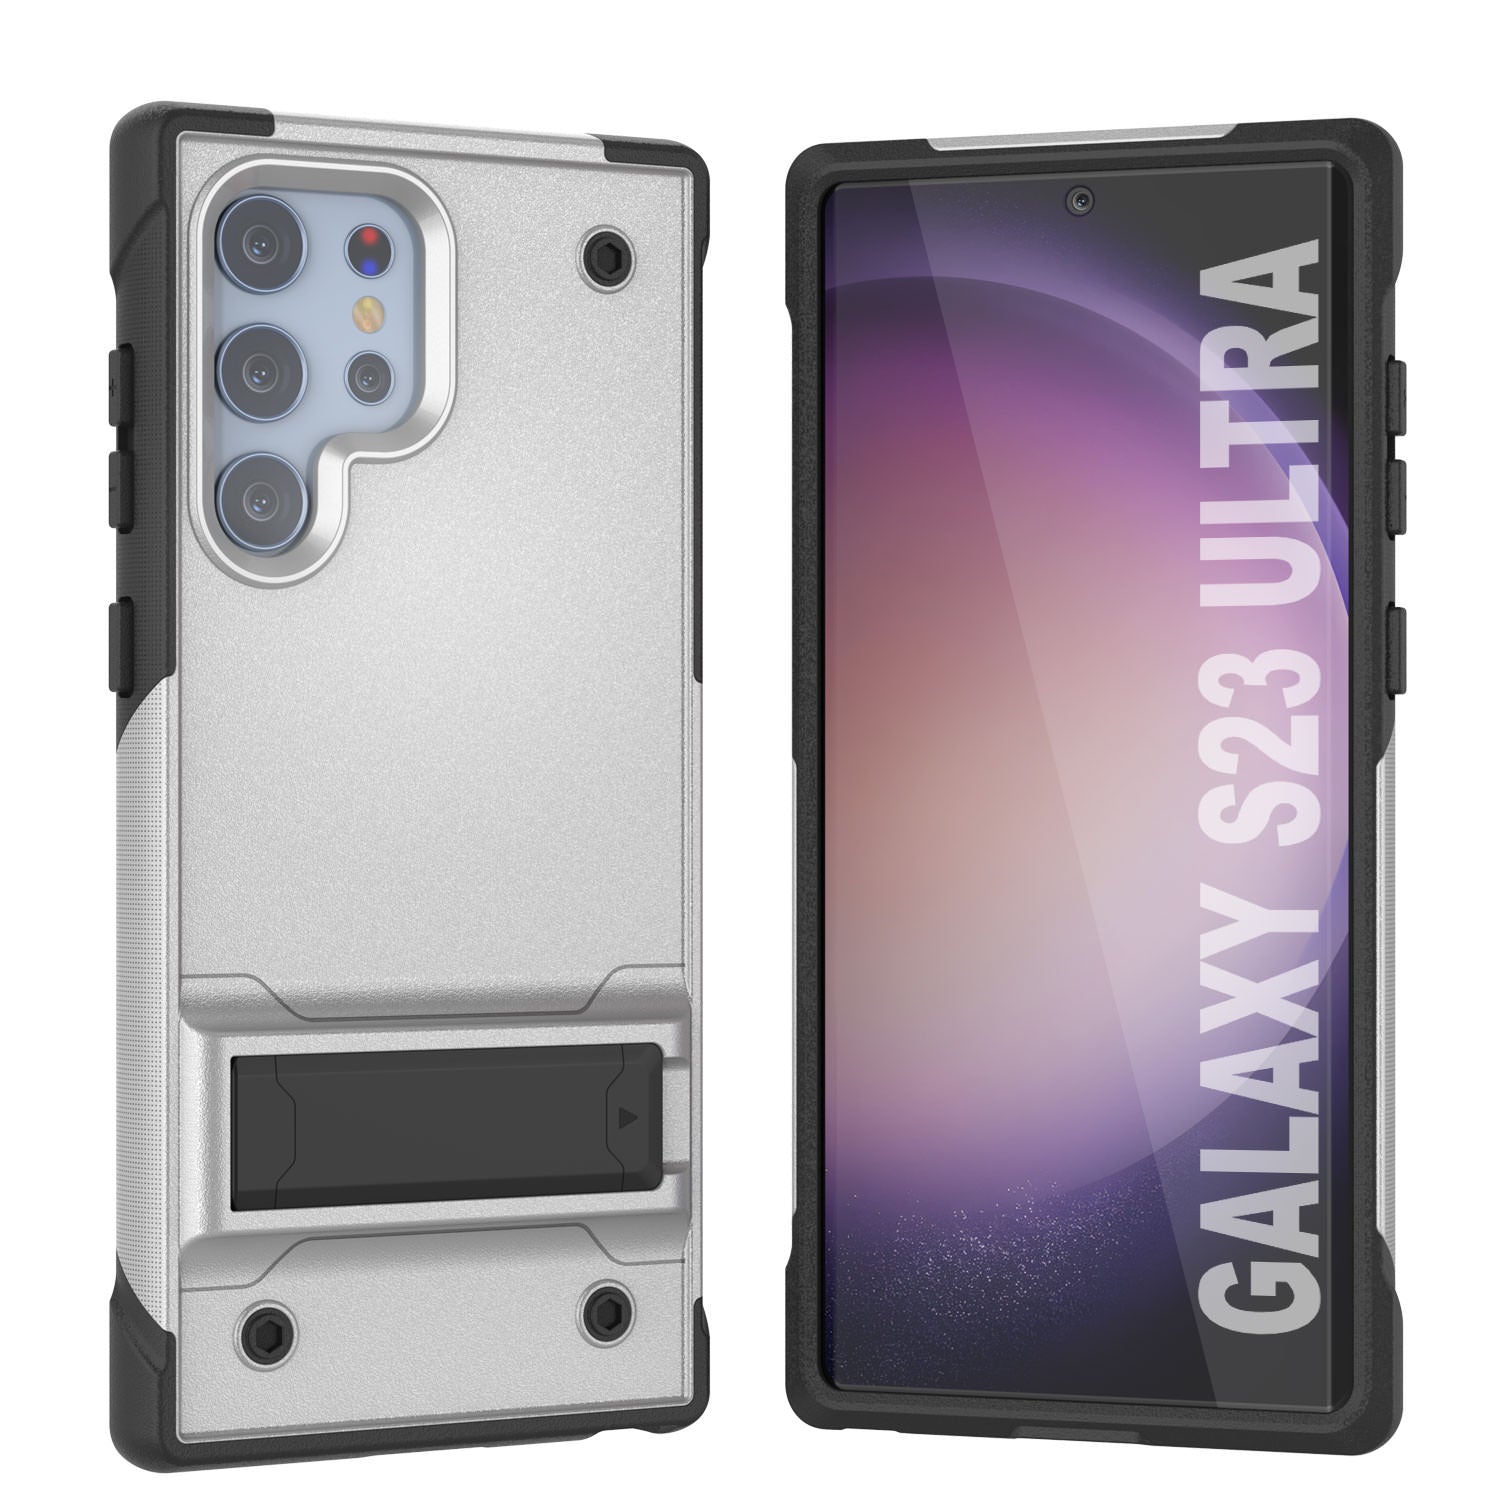 Punkcase Galaxy S24 Ultra Case [Reliance Series] Protective Hybrid Military Grade Cover W/Built-in Kickstand [White-Black]